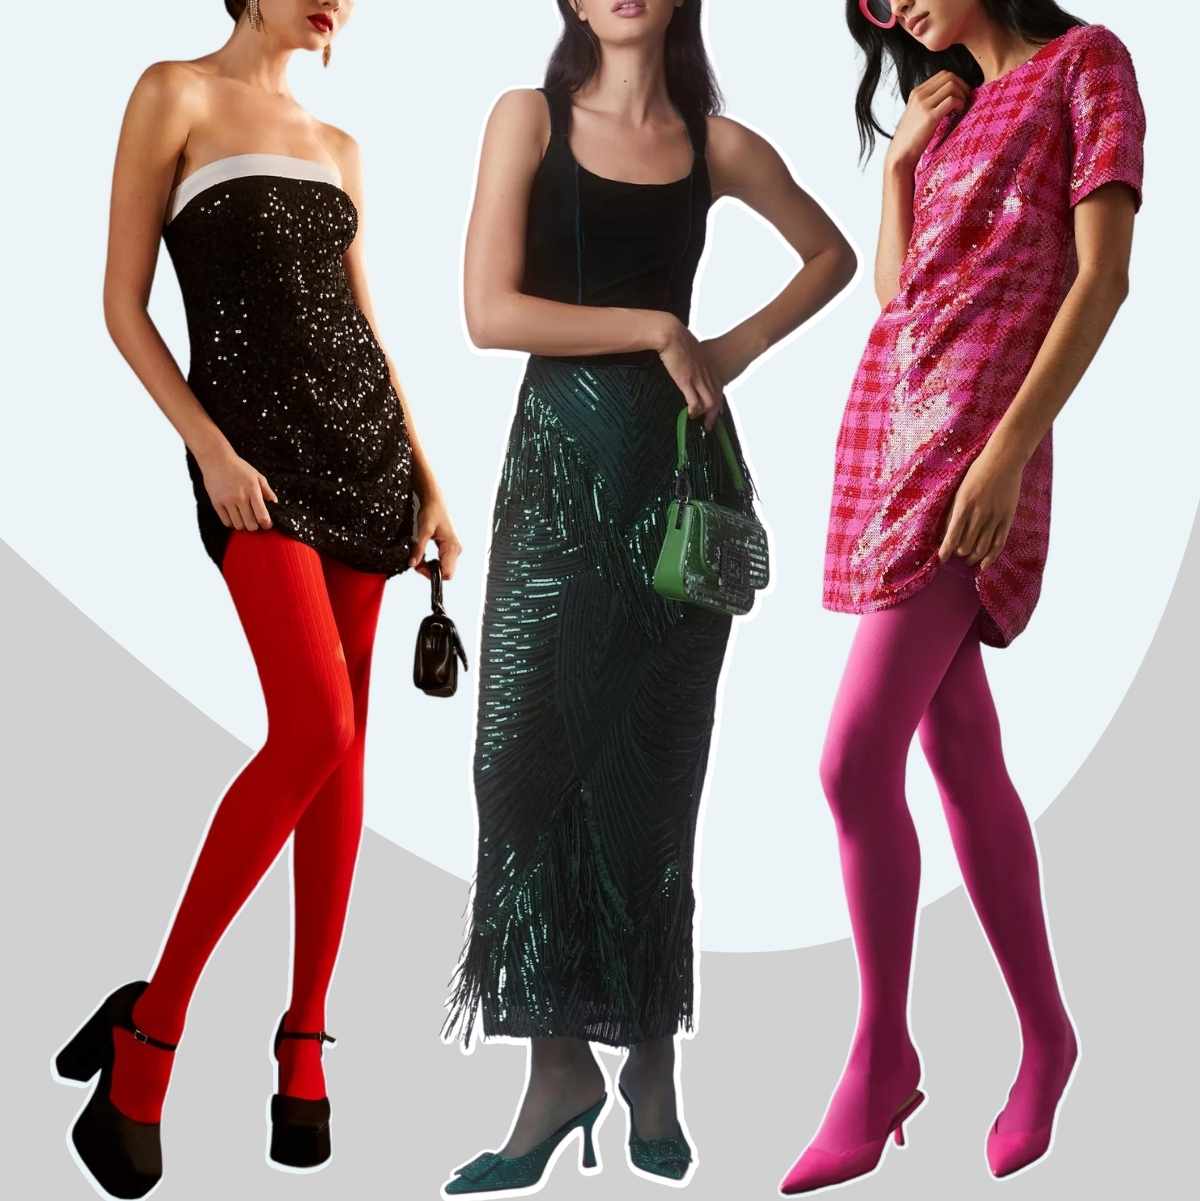 Collage of 3 Women wearing different shoes with sequin dresses and colorful stockings.